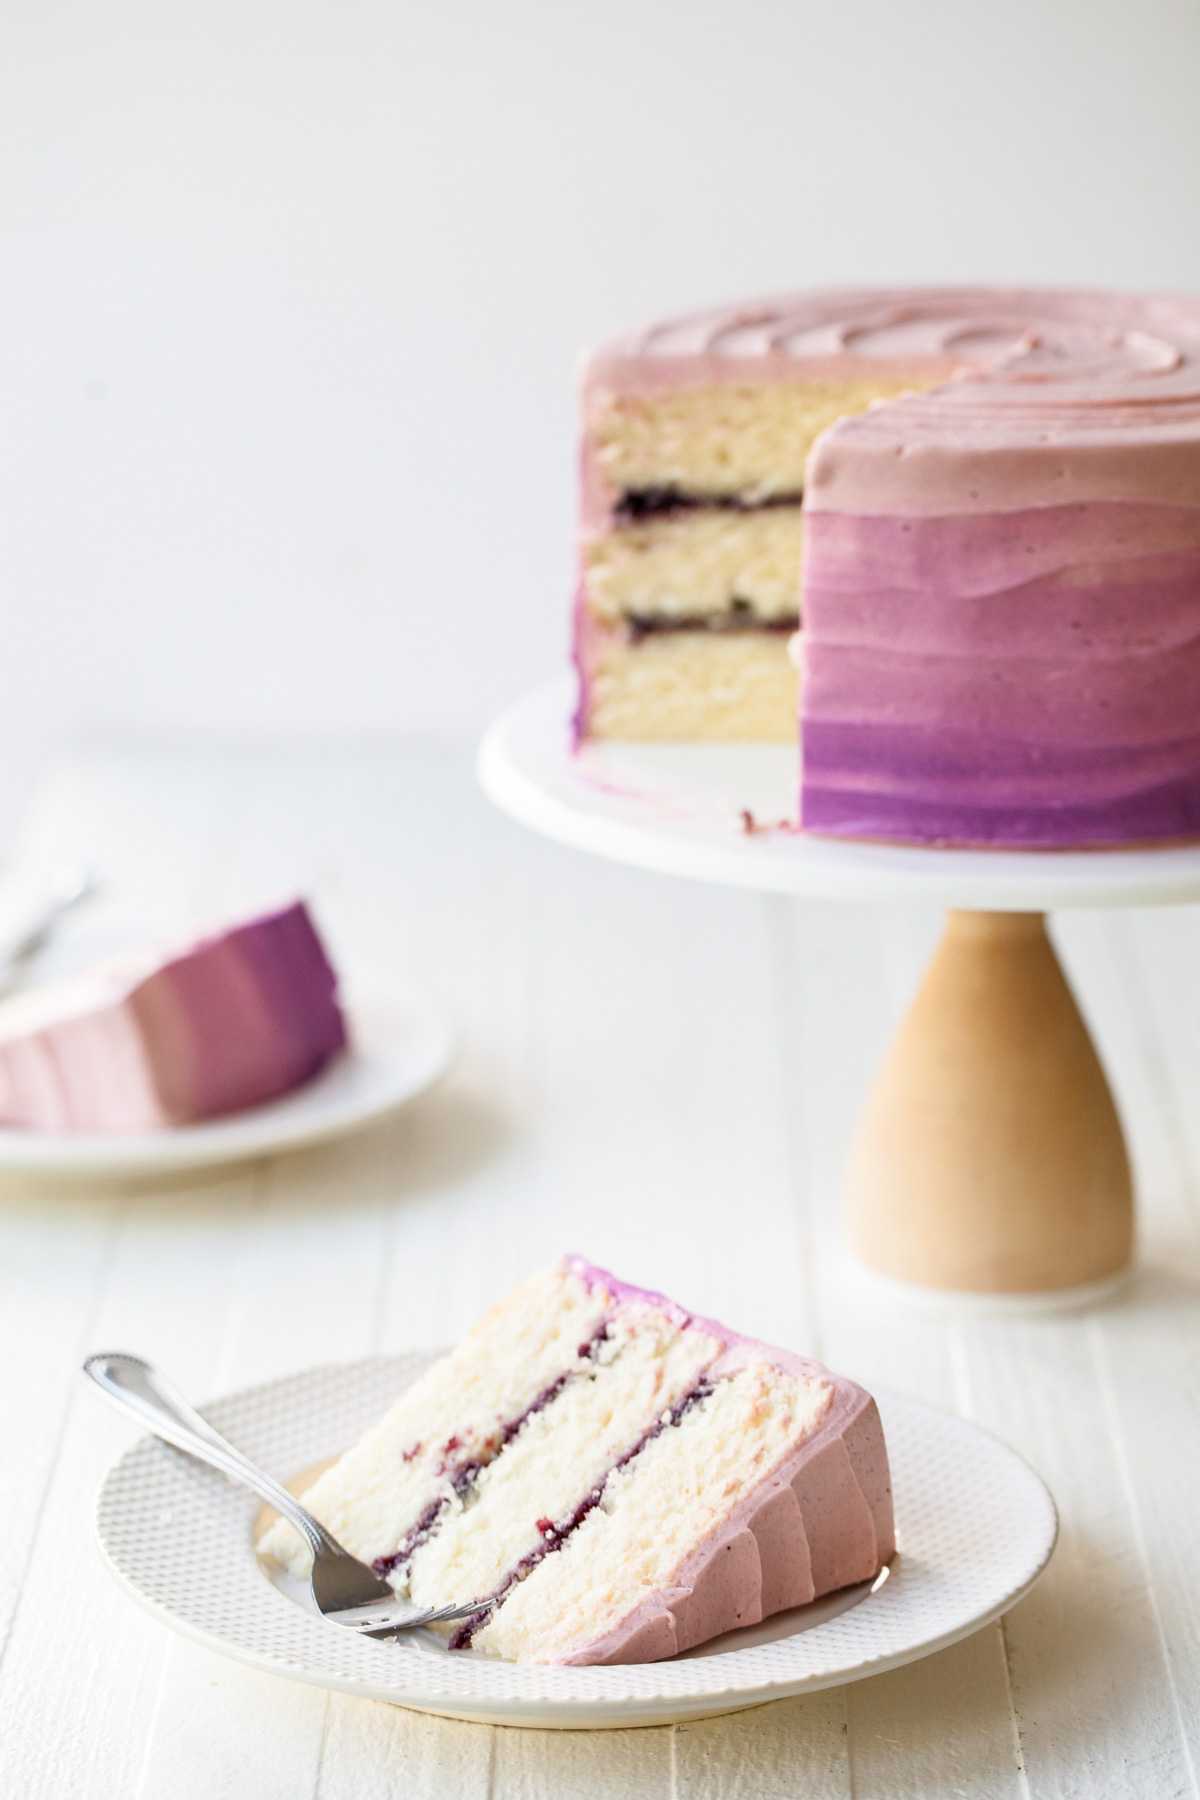 A sliced blueberry layer cake with three layers of fluffy white cake and blueberry jam filling.